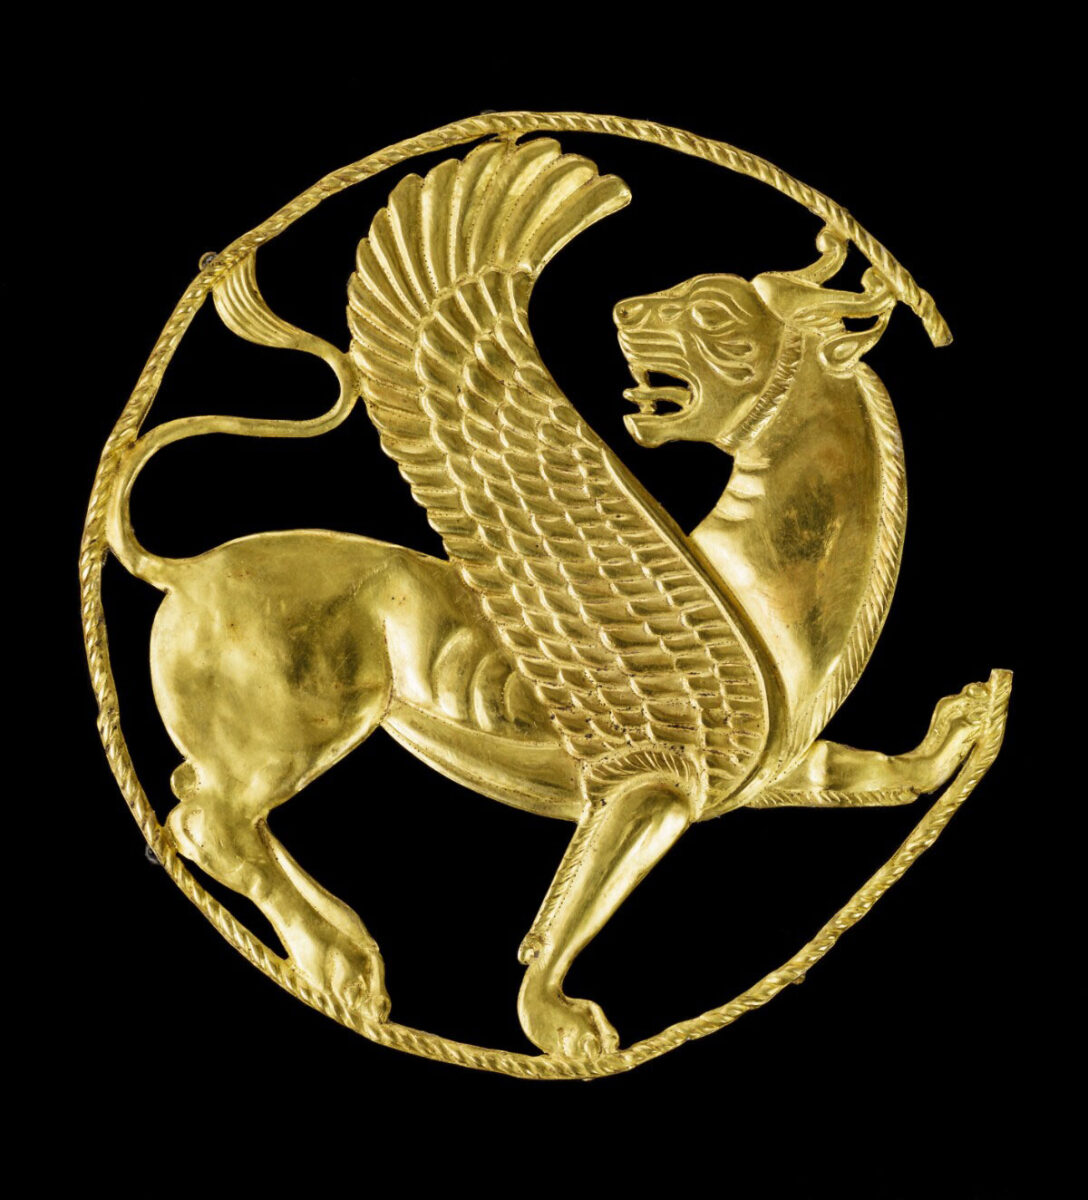 Plaque with a Winged Lion-Griffin, Achaemenid, 500–330 BC. Gold, 1/8 × 4 1/8 × 4 1/4 in. The Oriental Institute of the University of Chicago, A28582, VEX 2021.1.109. Photo: Courtesy of the Oriental Institute of the University of Chicago